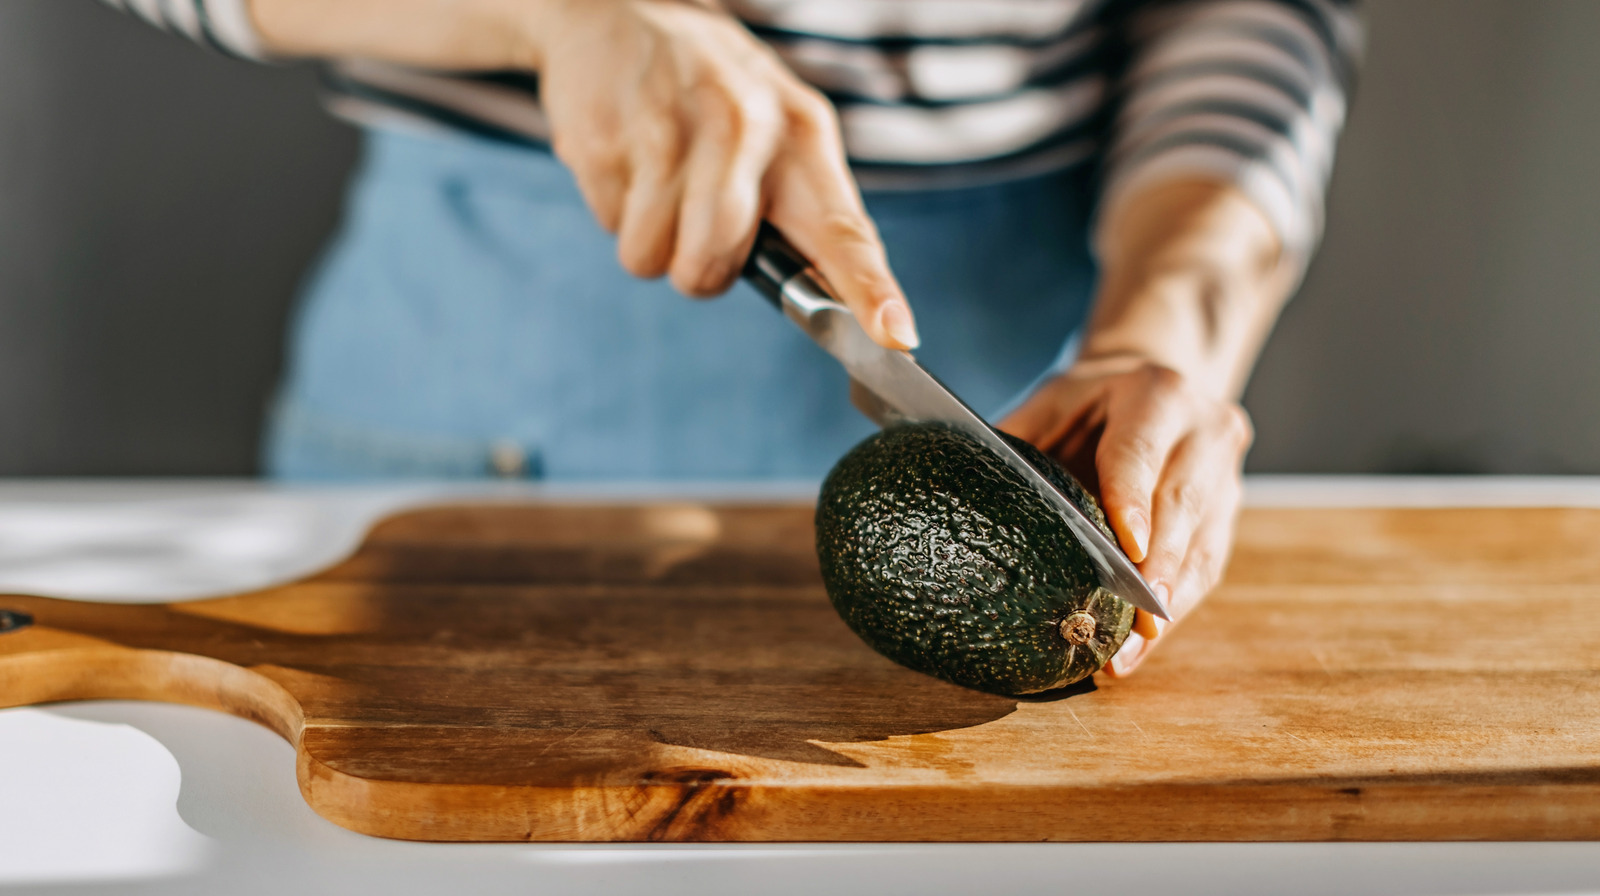 https://www.foodie.com/img/gallery/the-only-knife-you-should-be-using-to-cut-avocados/l-intro-1691699269.jpg